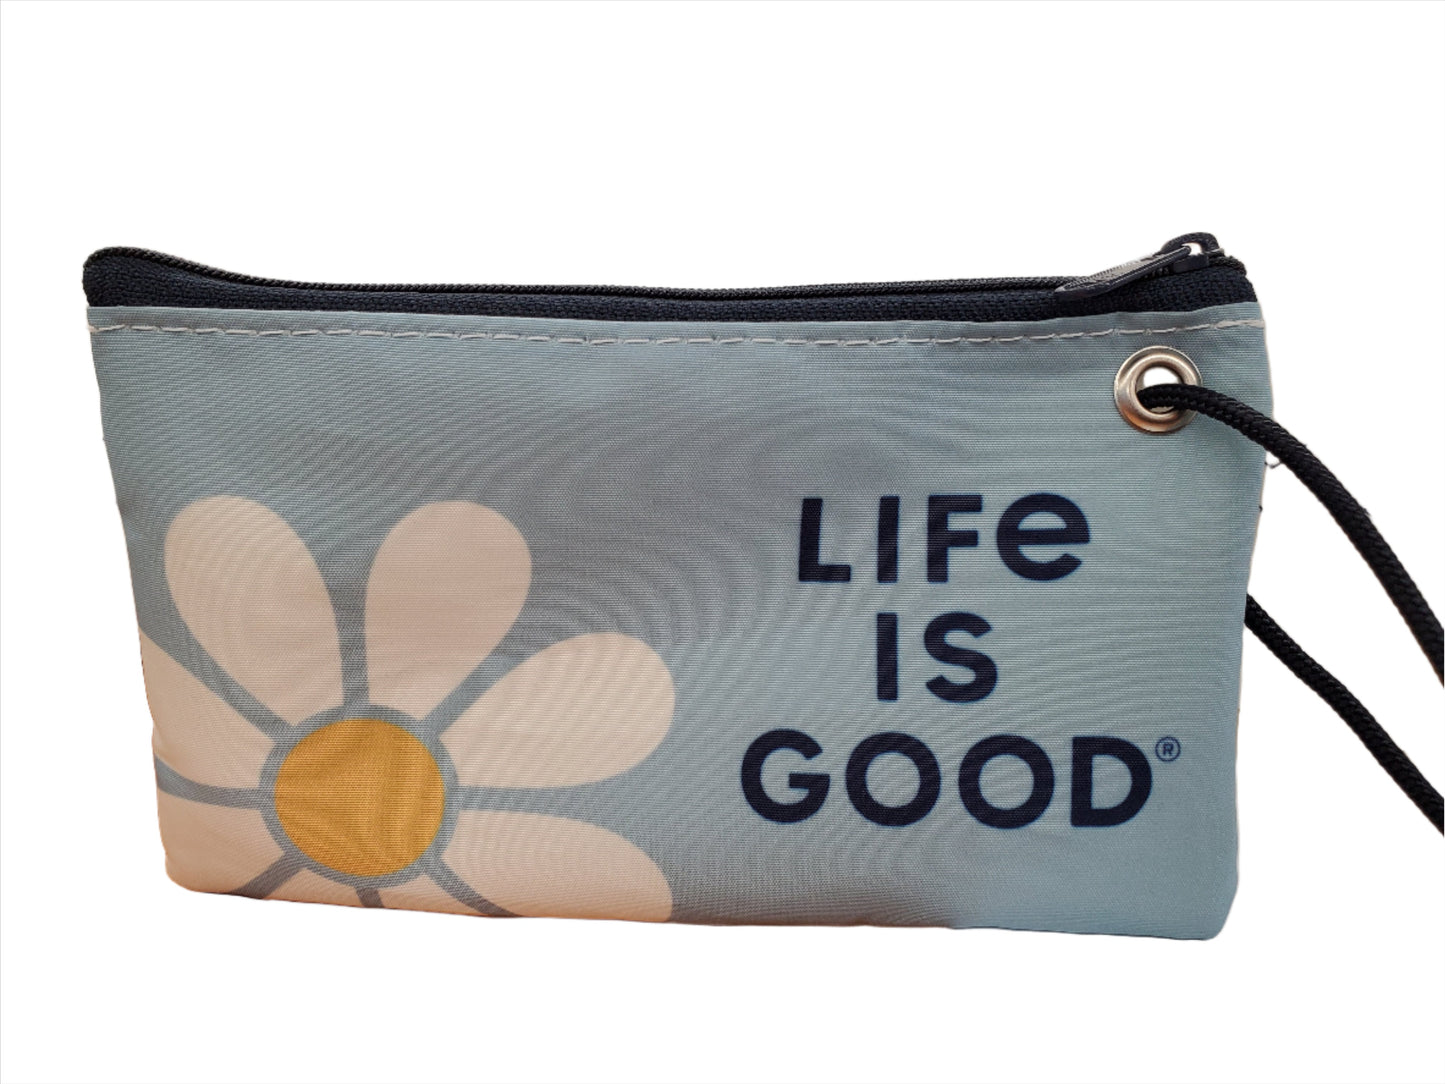 Seabag - Life is good - Hand pouch